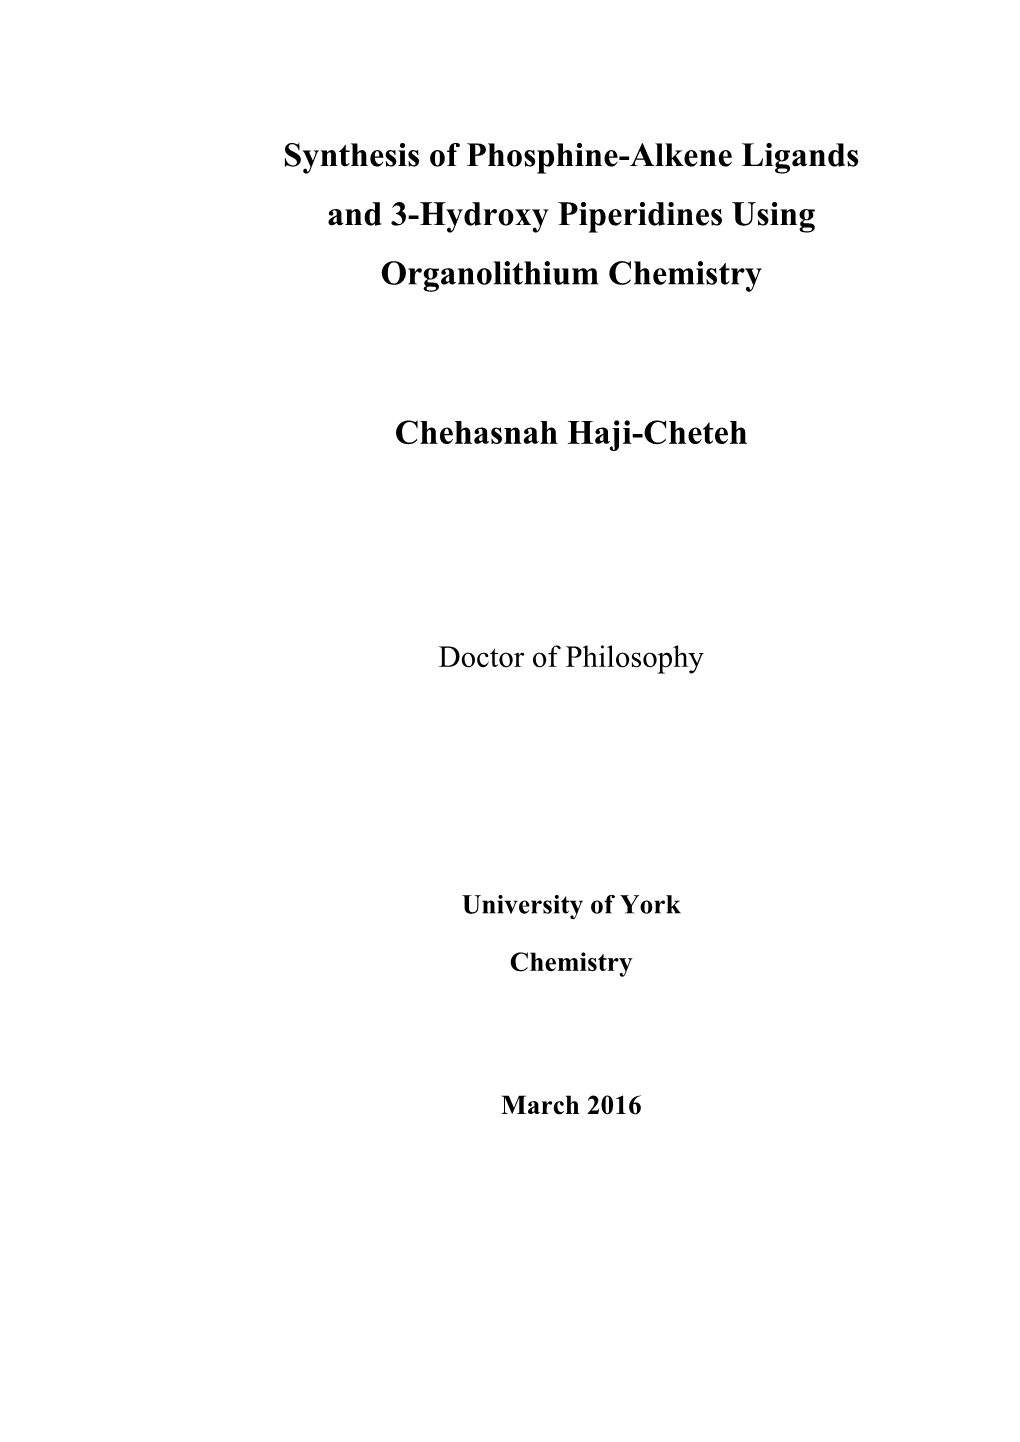 Synthesis of Phosphine-Alkene Ligands and 3-Hydroxy Piperidines Using Organolithium Chemistry Chehasnah Haji-Cheteh